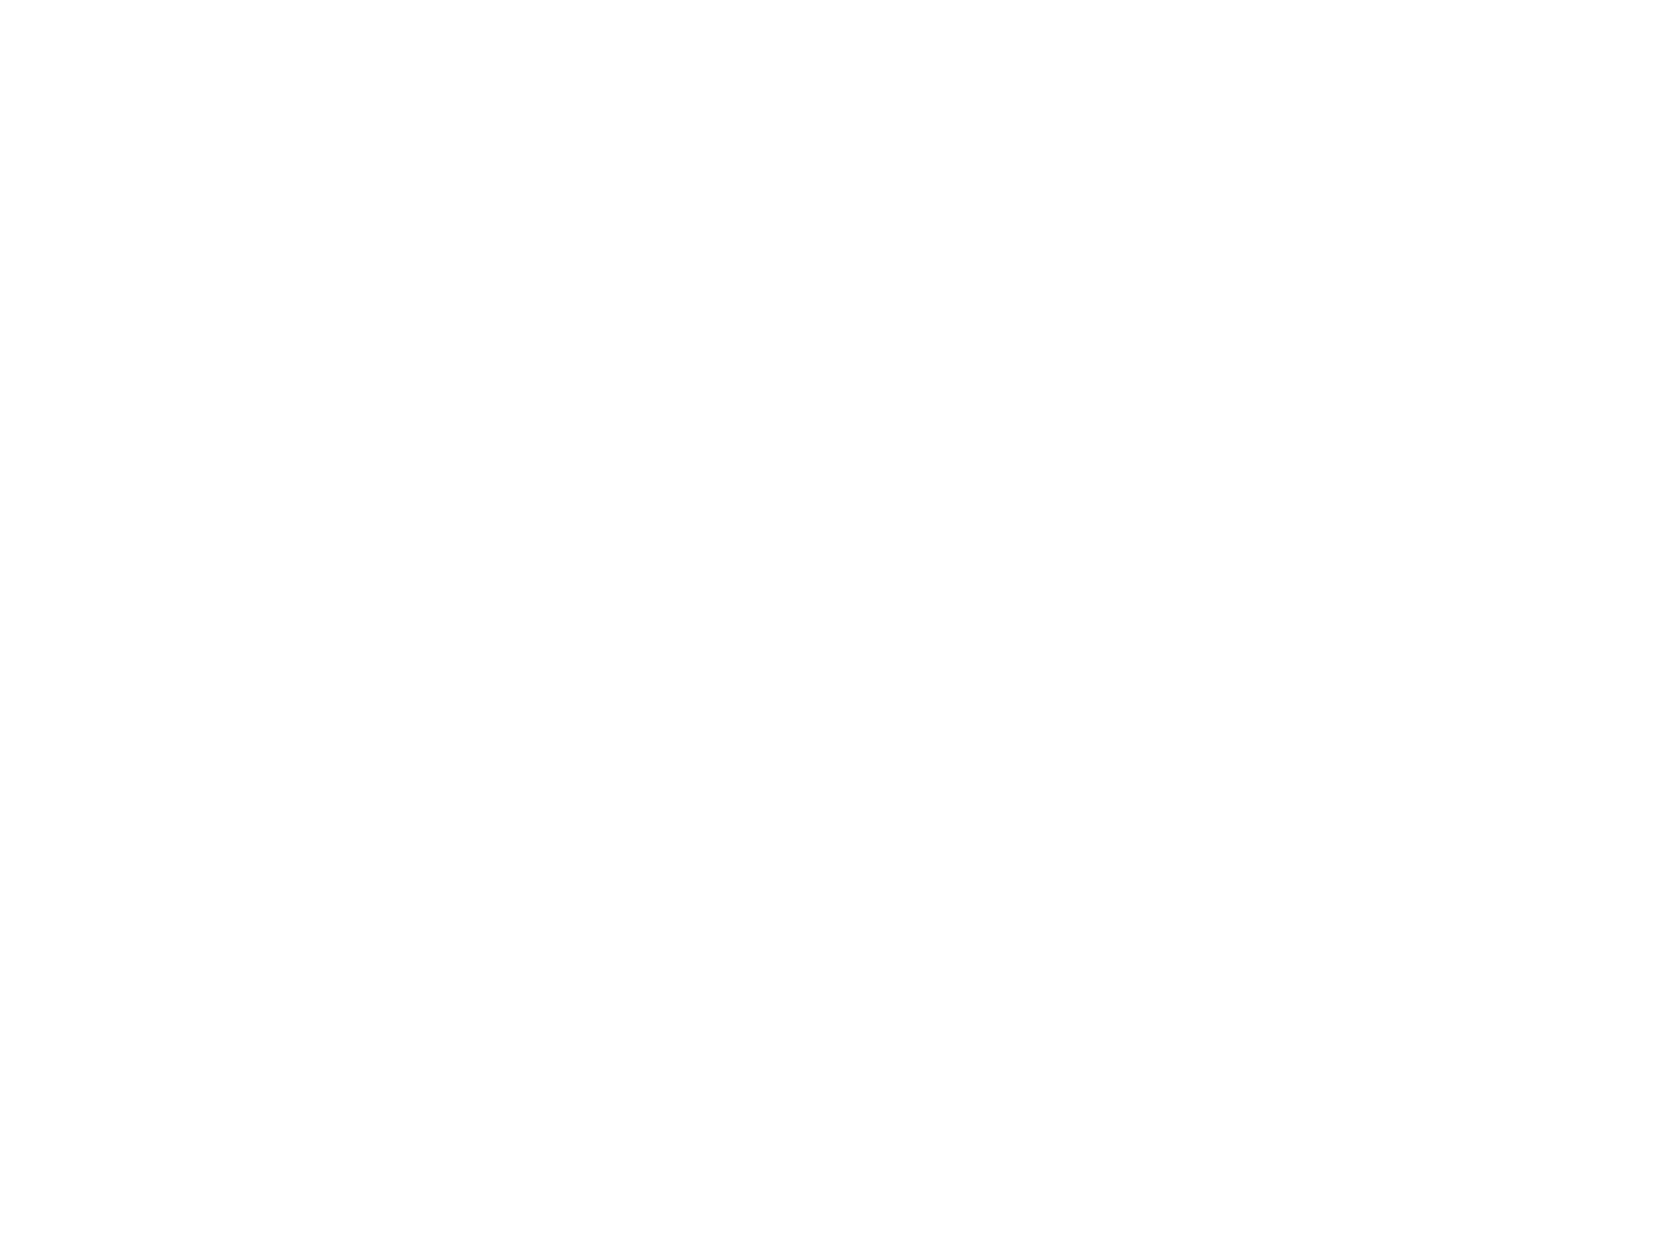 I was afraid to get the vaccine because I was pregnant